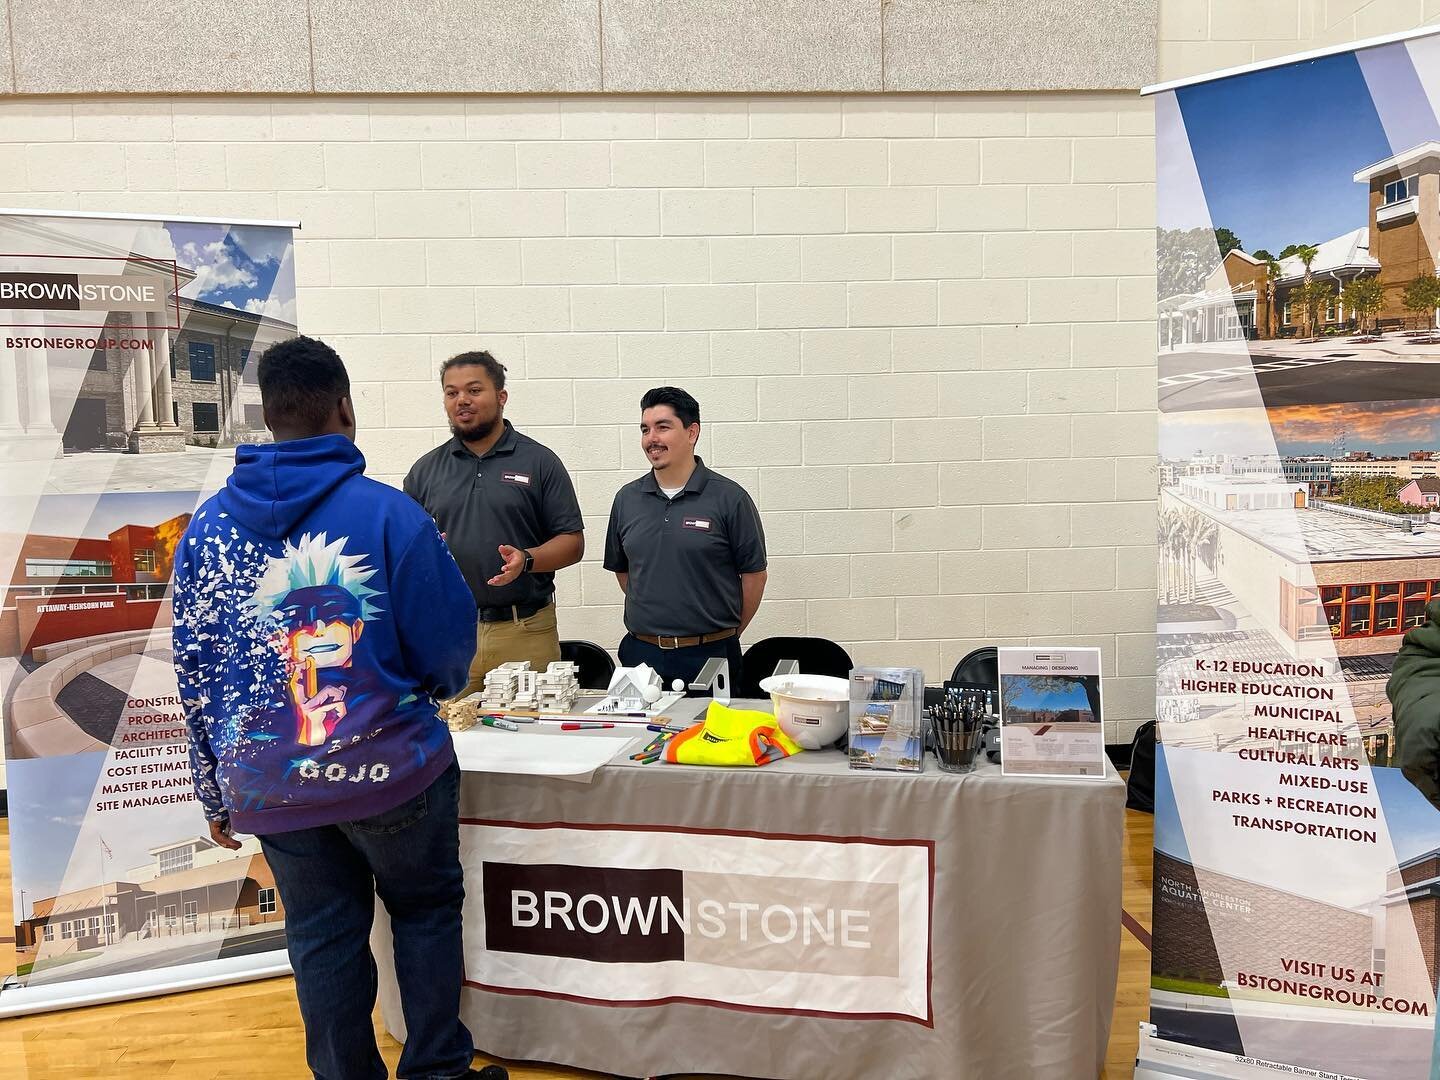 Team Brownstone had a great time speaking with students at Columbia High School this past Friday during their Career Pathway Fair. Architectural Designers Jordan Garza and Deven Lockhart discussed the route to a career in architecture and gave studen